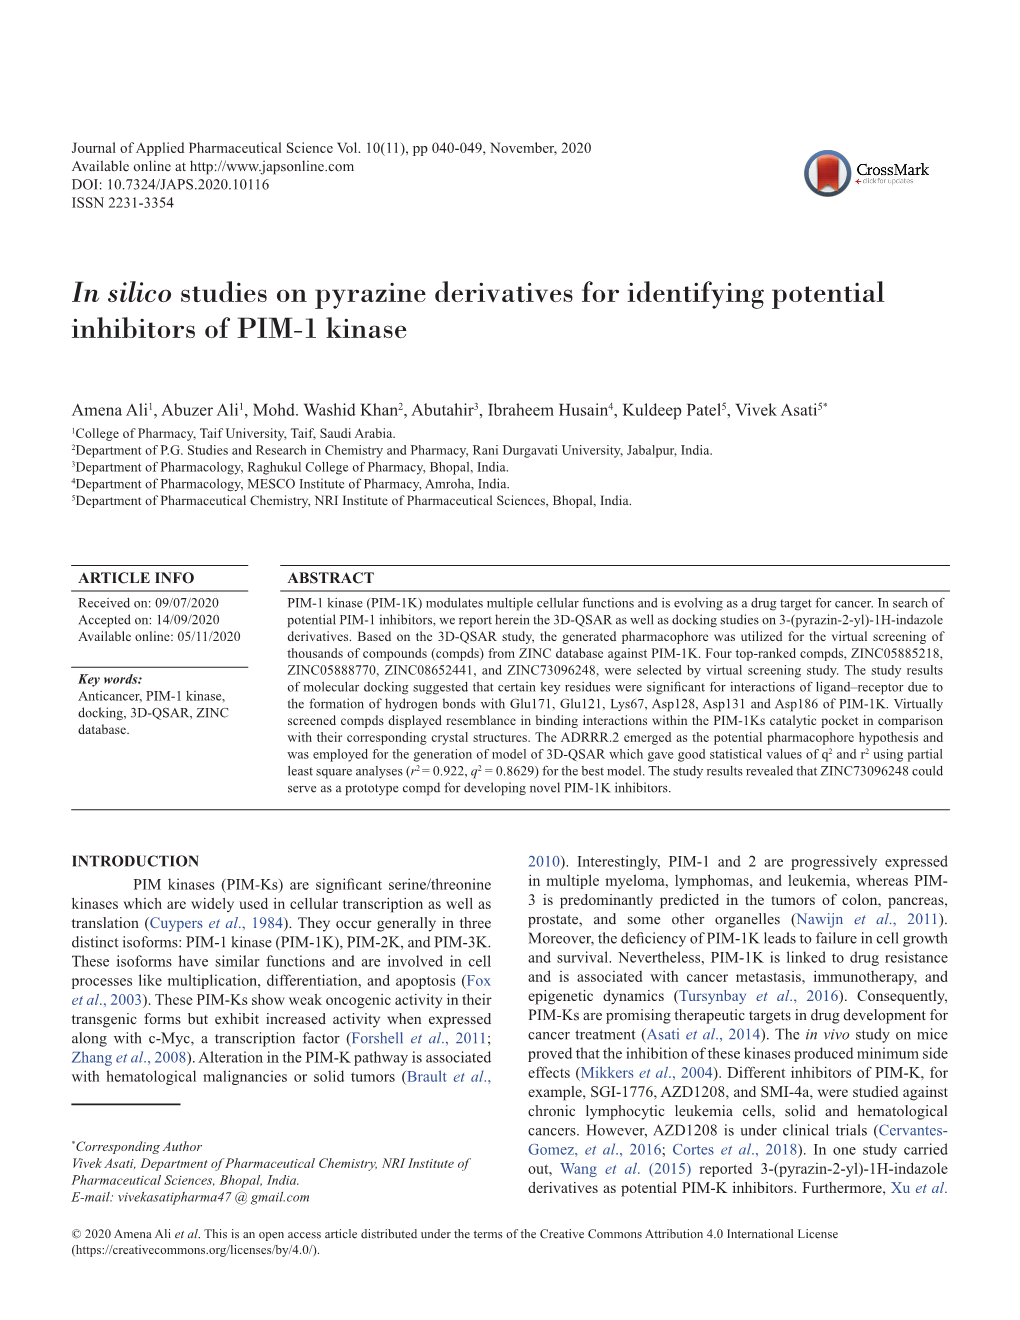 In Silico Studies on Pyrazine Derivatives for Identifying Potential Inhibitors of PIM-1 Kinase